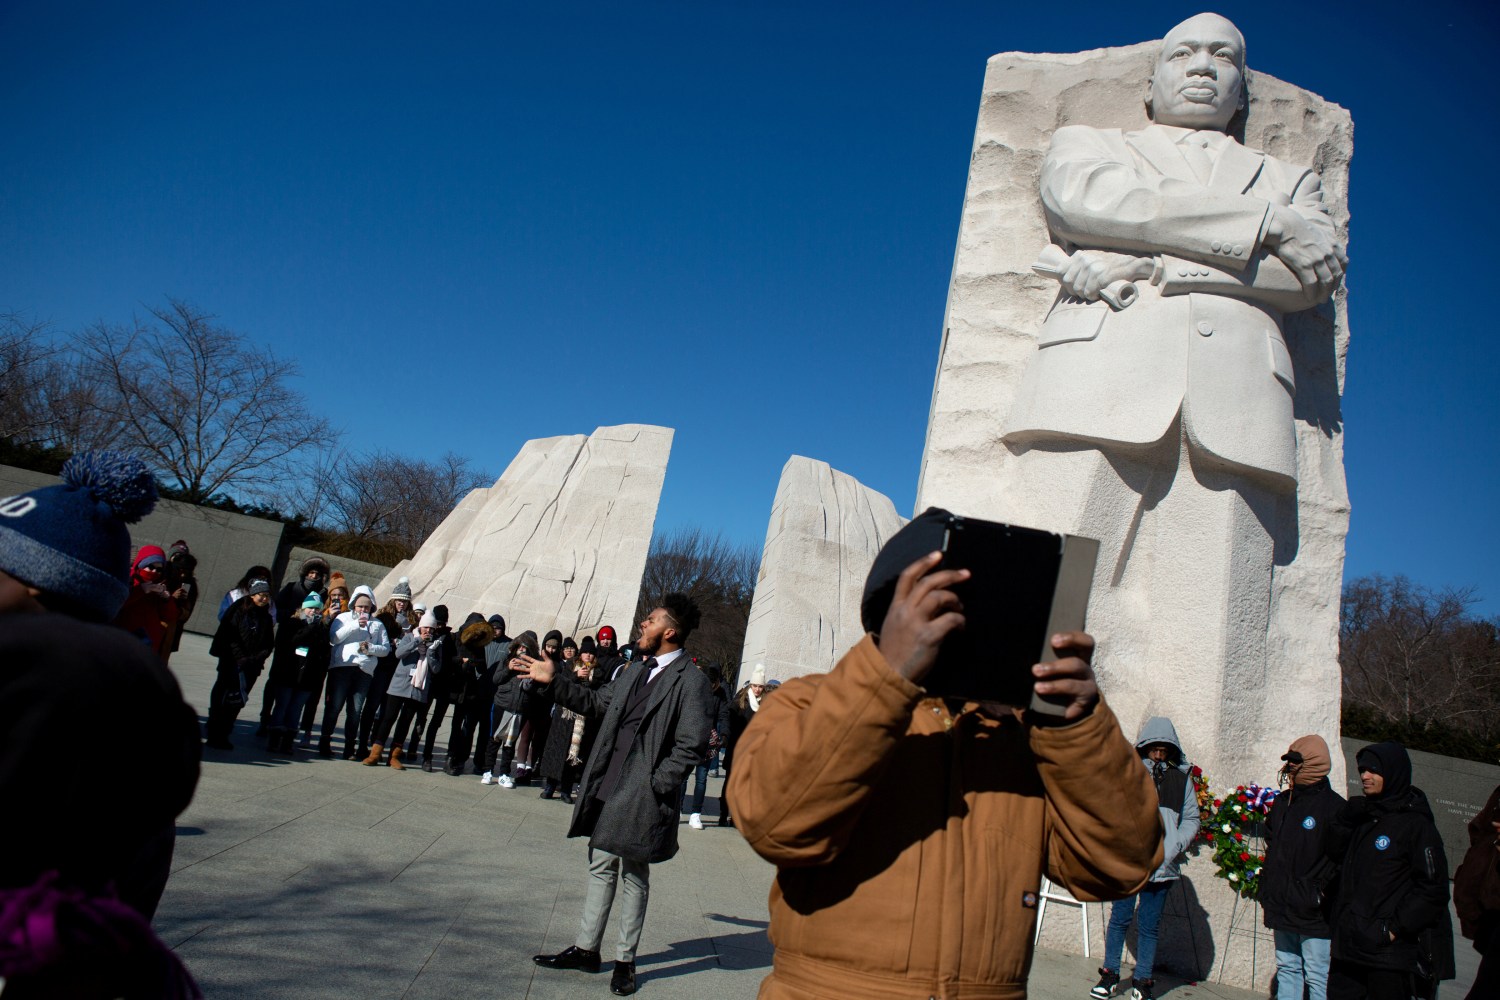 Brandon Stanard, 24, a student at Lincoln University, recites Martin Luther King, Jr.'s "I have a dream" speech to a gathering crowd at the base of a statue of the civil rights leader at the Martin Luther King, Jr. Memorial on Martin Luther King Jr. Day in Washington, U.S., January 21, 2019. REUTERS/Allison Shelley     TPX IMAGES OF THE DAY - RC1FB437CDE0